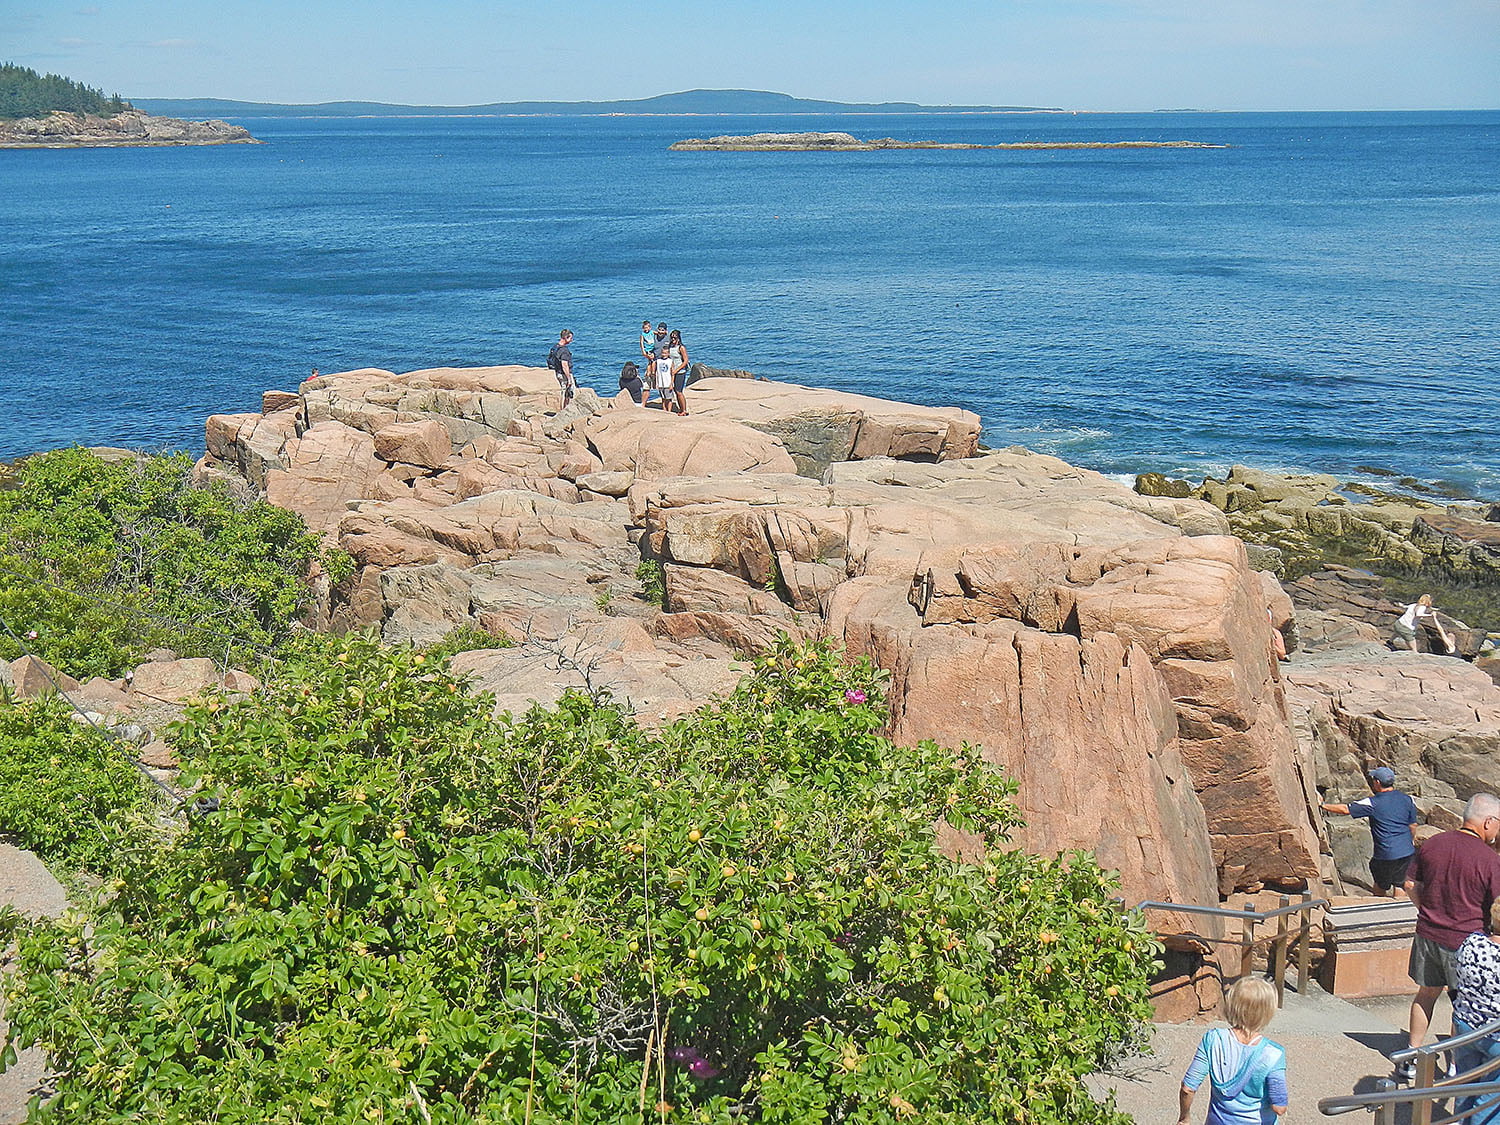 People exploring Thunder Hole in Acadia National Park, one of the more popular lookout points and a Maine landmark.